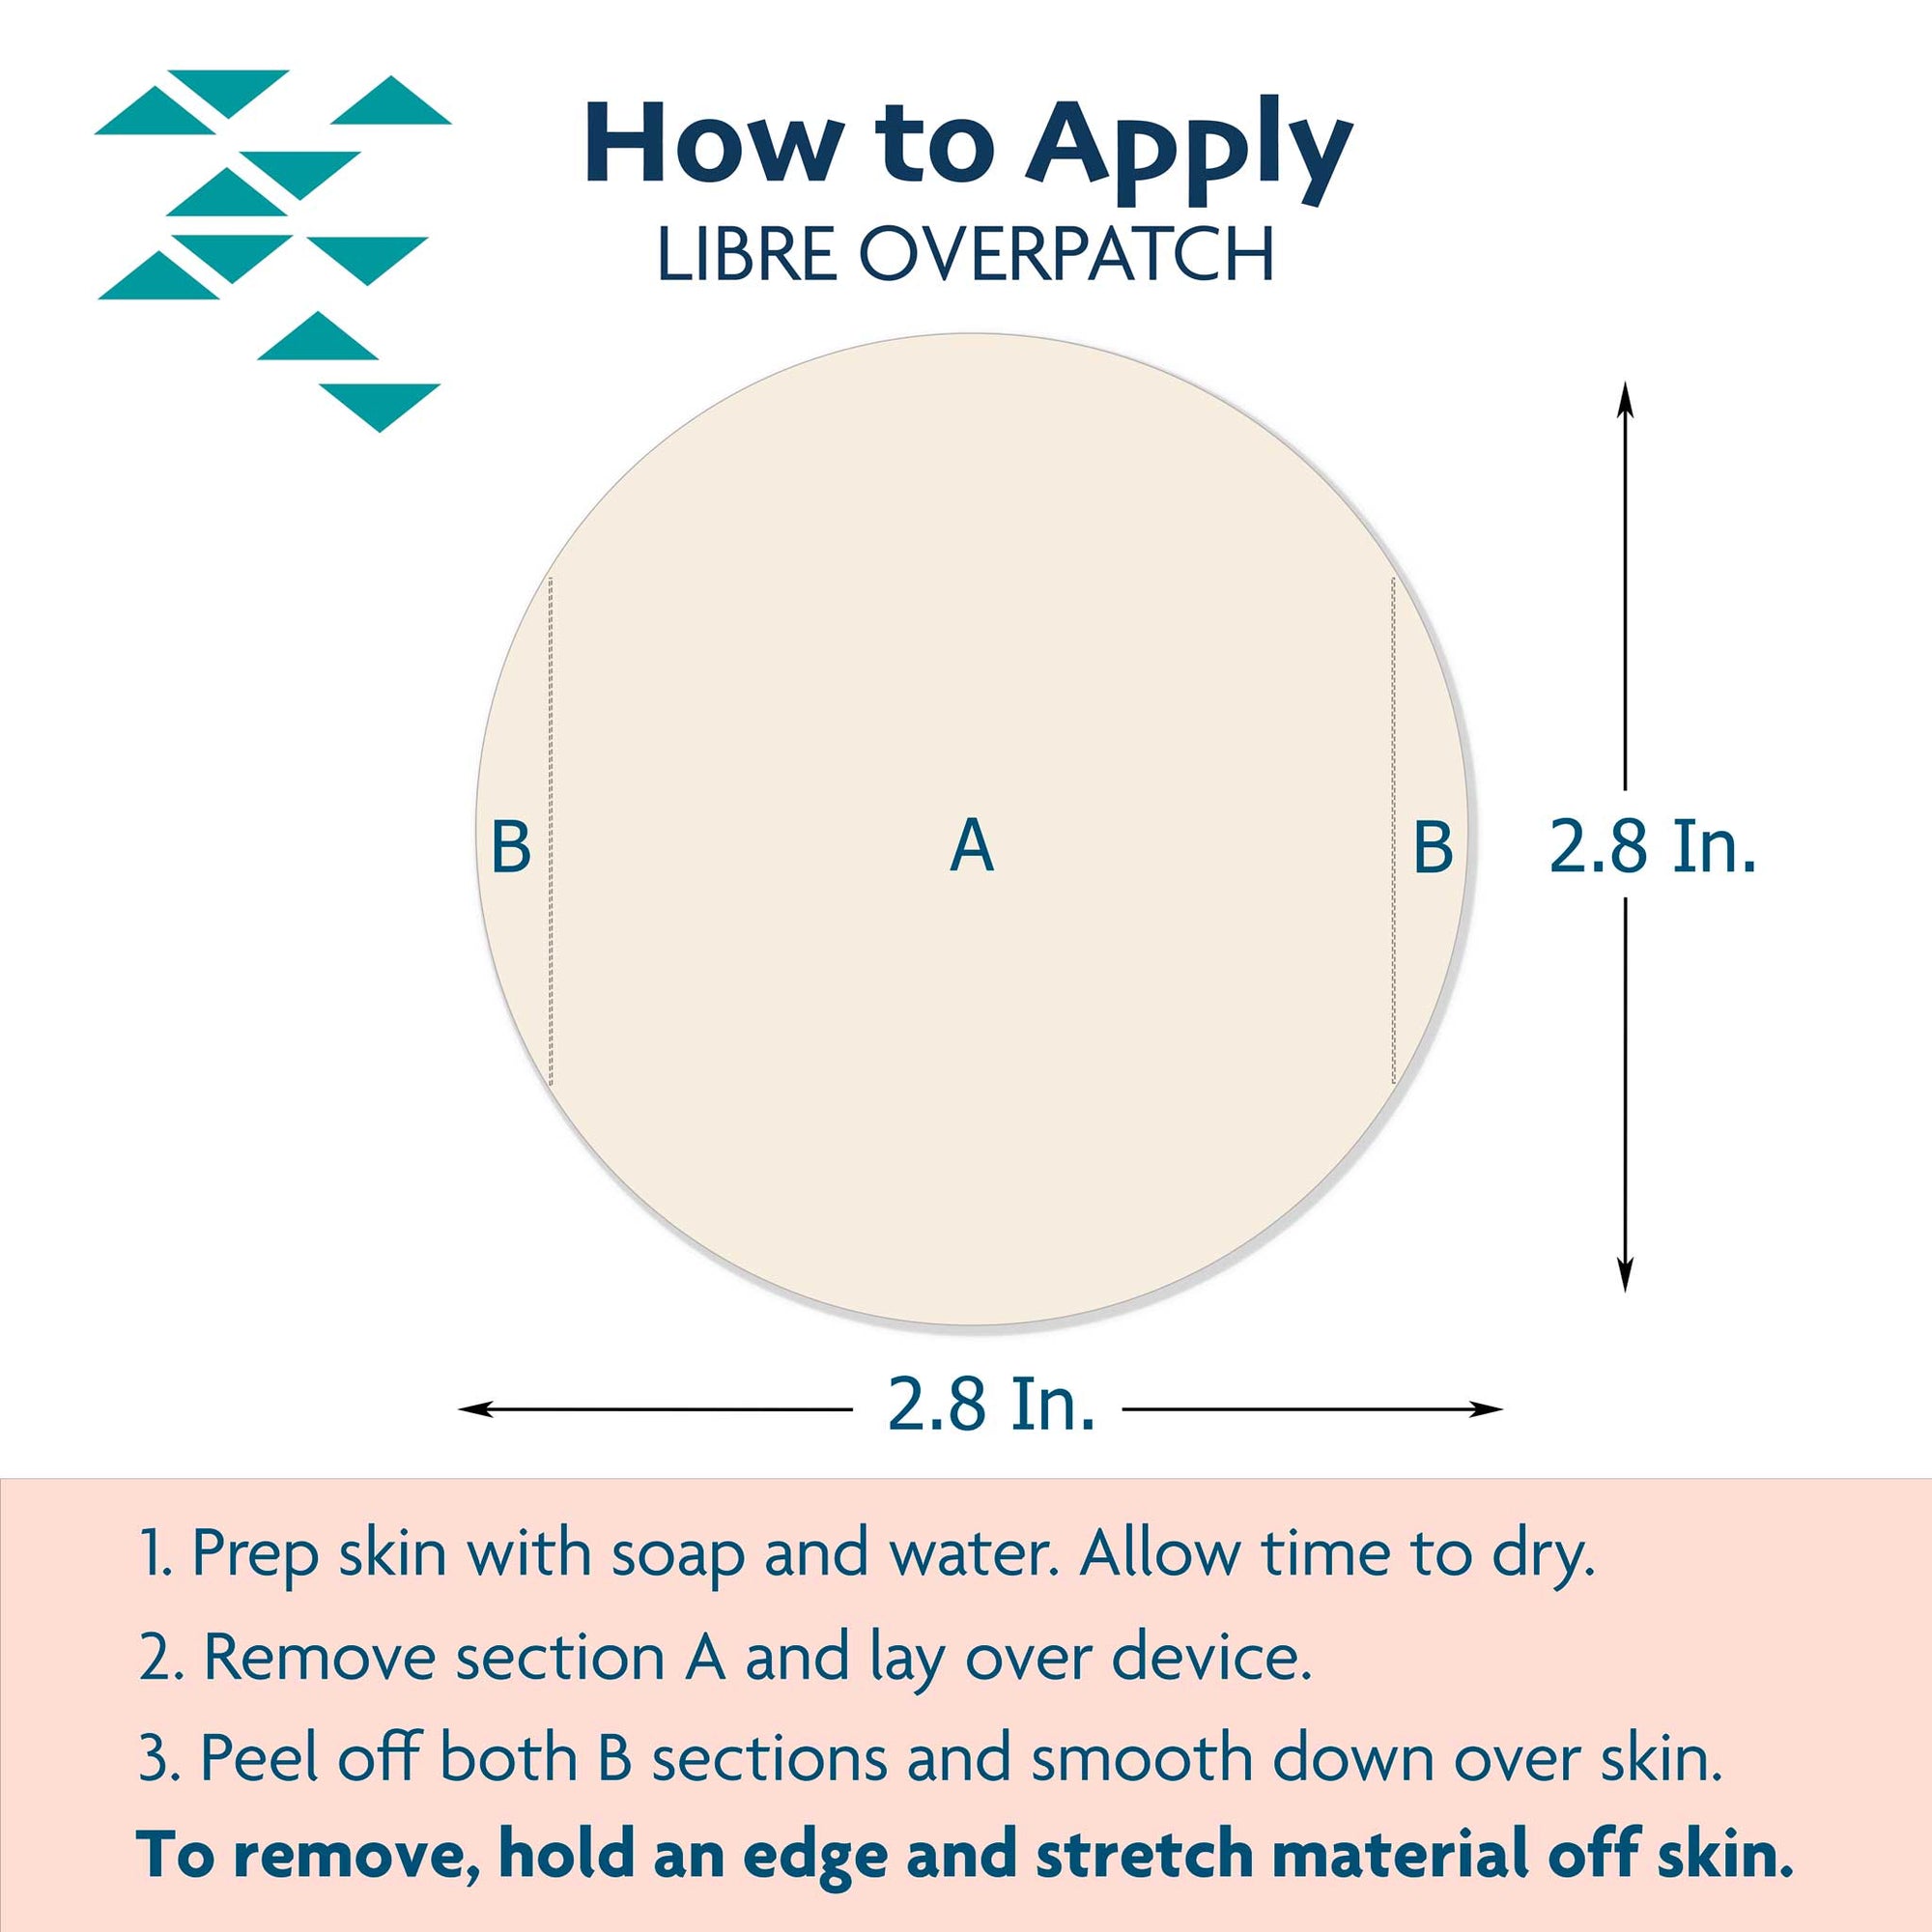 ExpressionMed skin prep recommendation